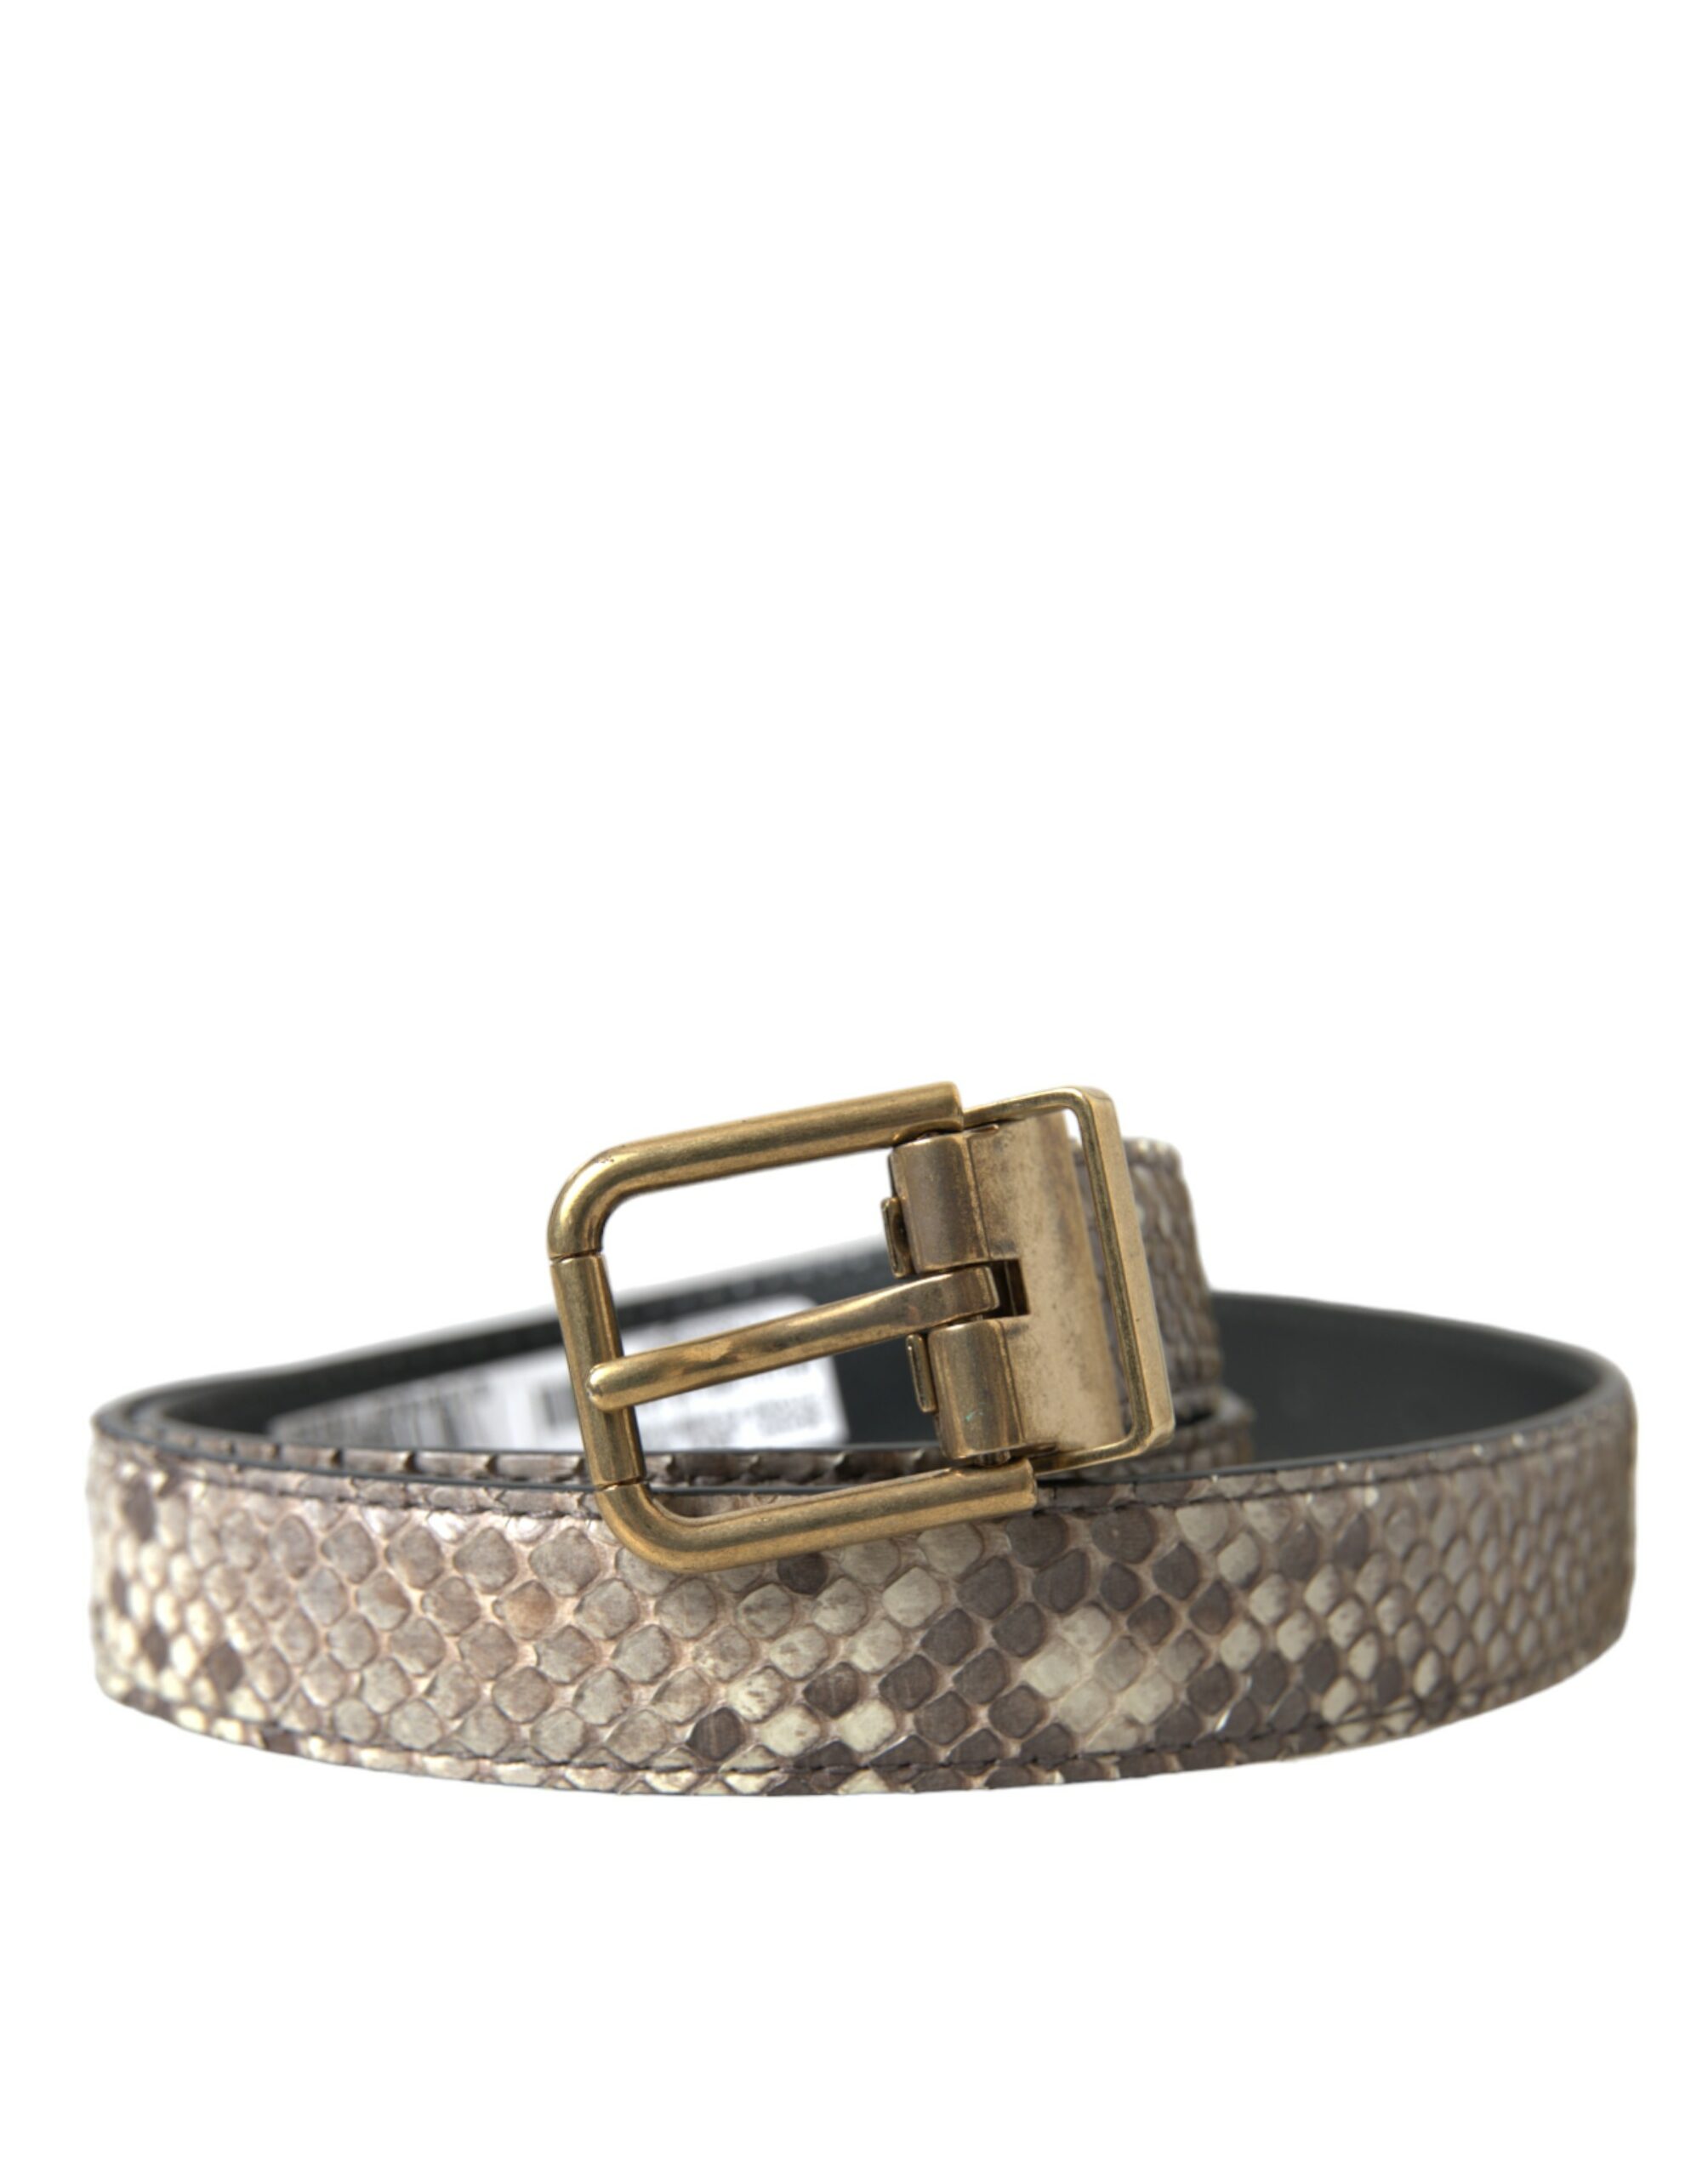 Brown Dolce & Gabbana Brown Python Leather Gold Metal Buckle Belt 80 cm / 32 Inches